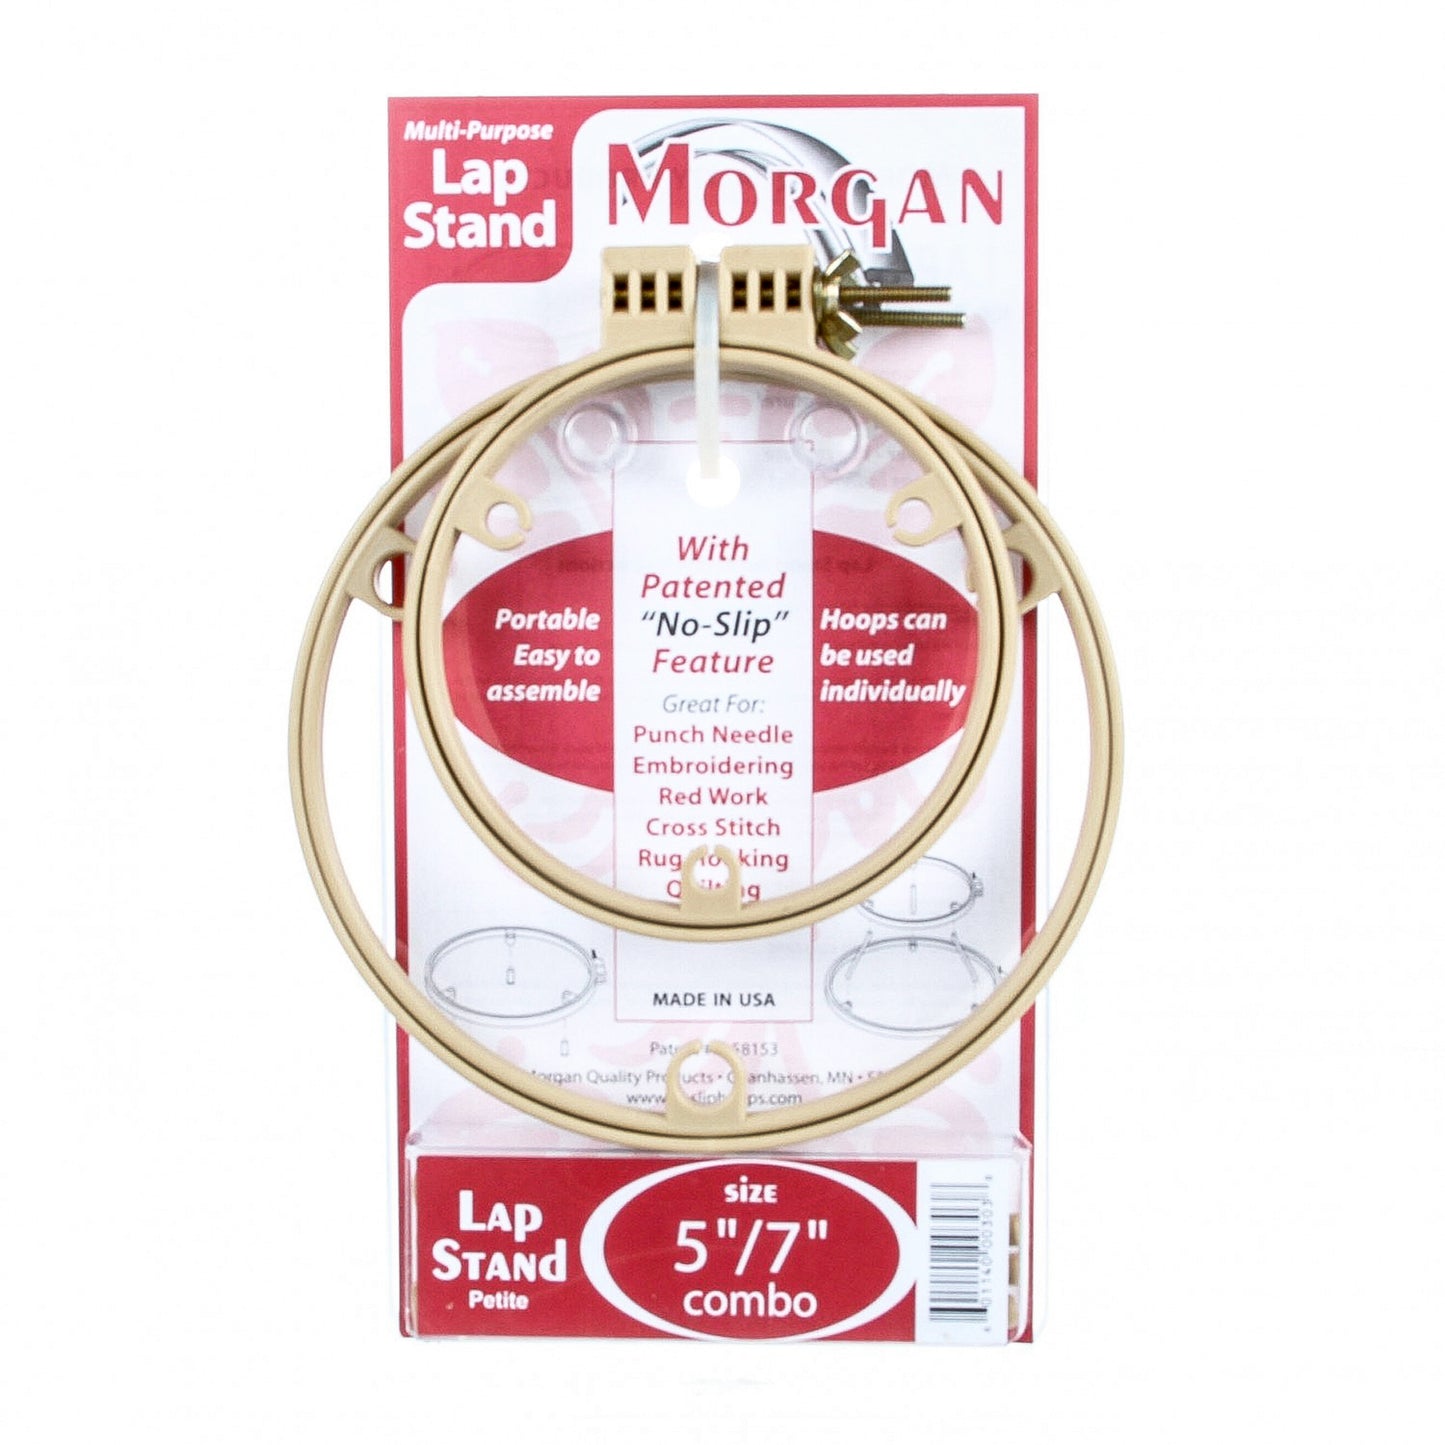 Morgan No-Slip Lap Stand Size 5" & 7" Hoop Combo Primary Image